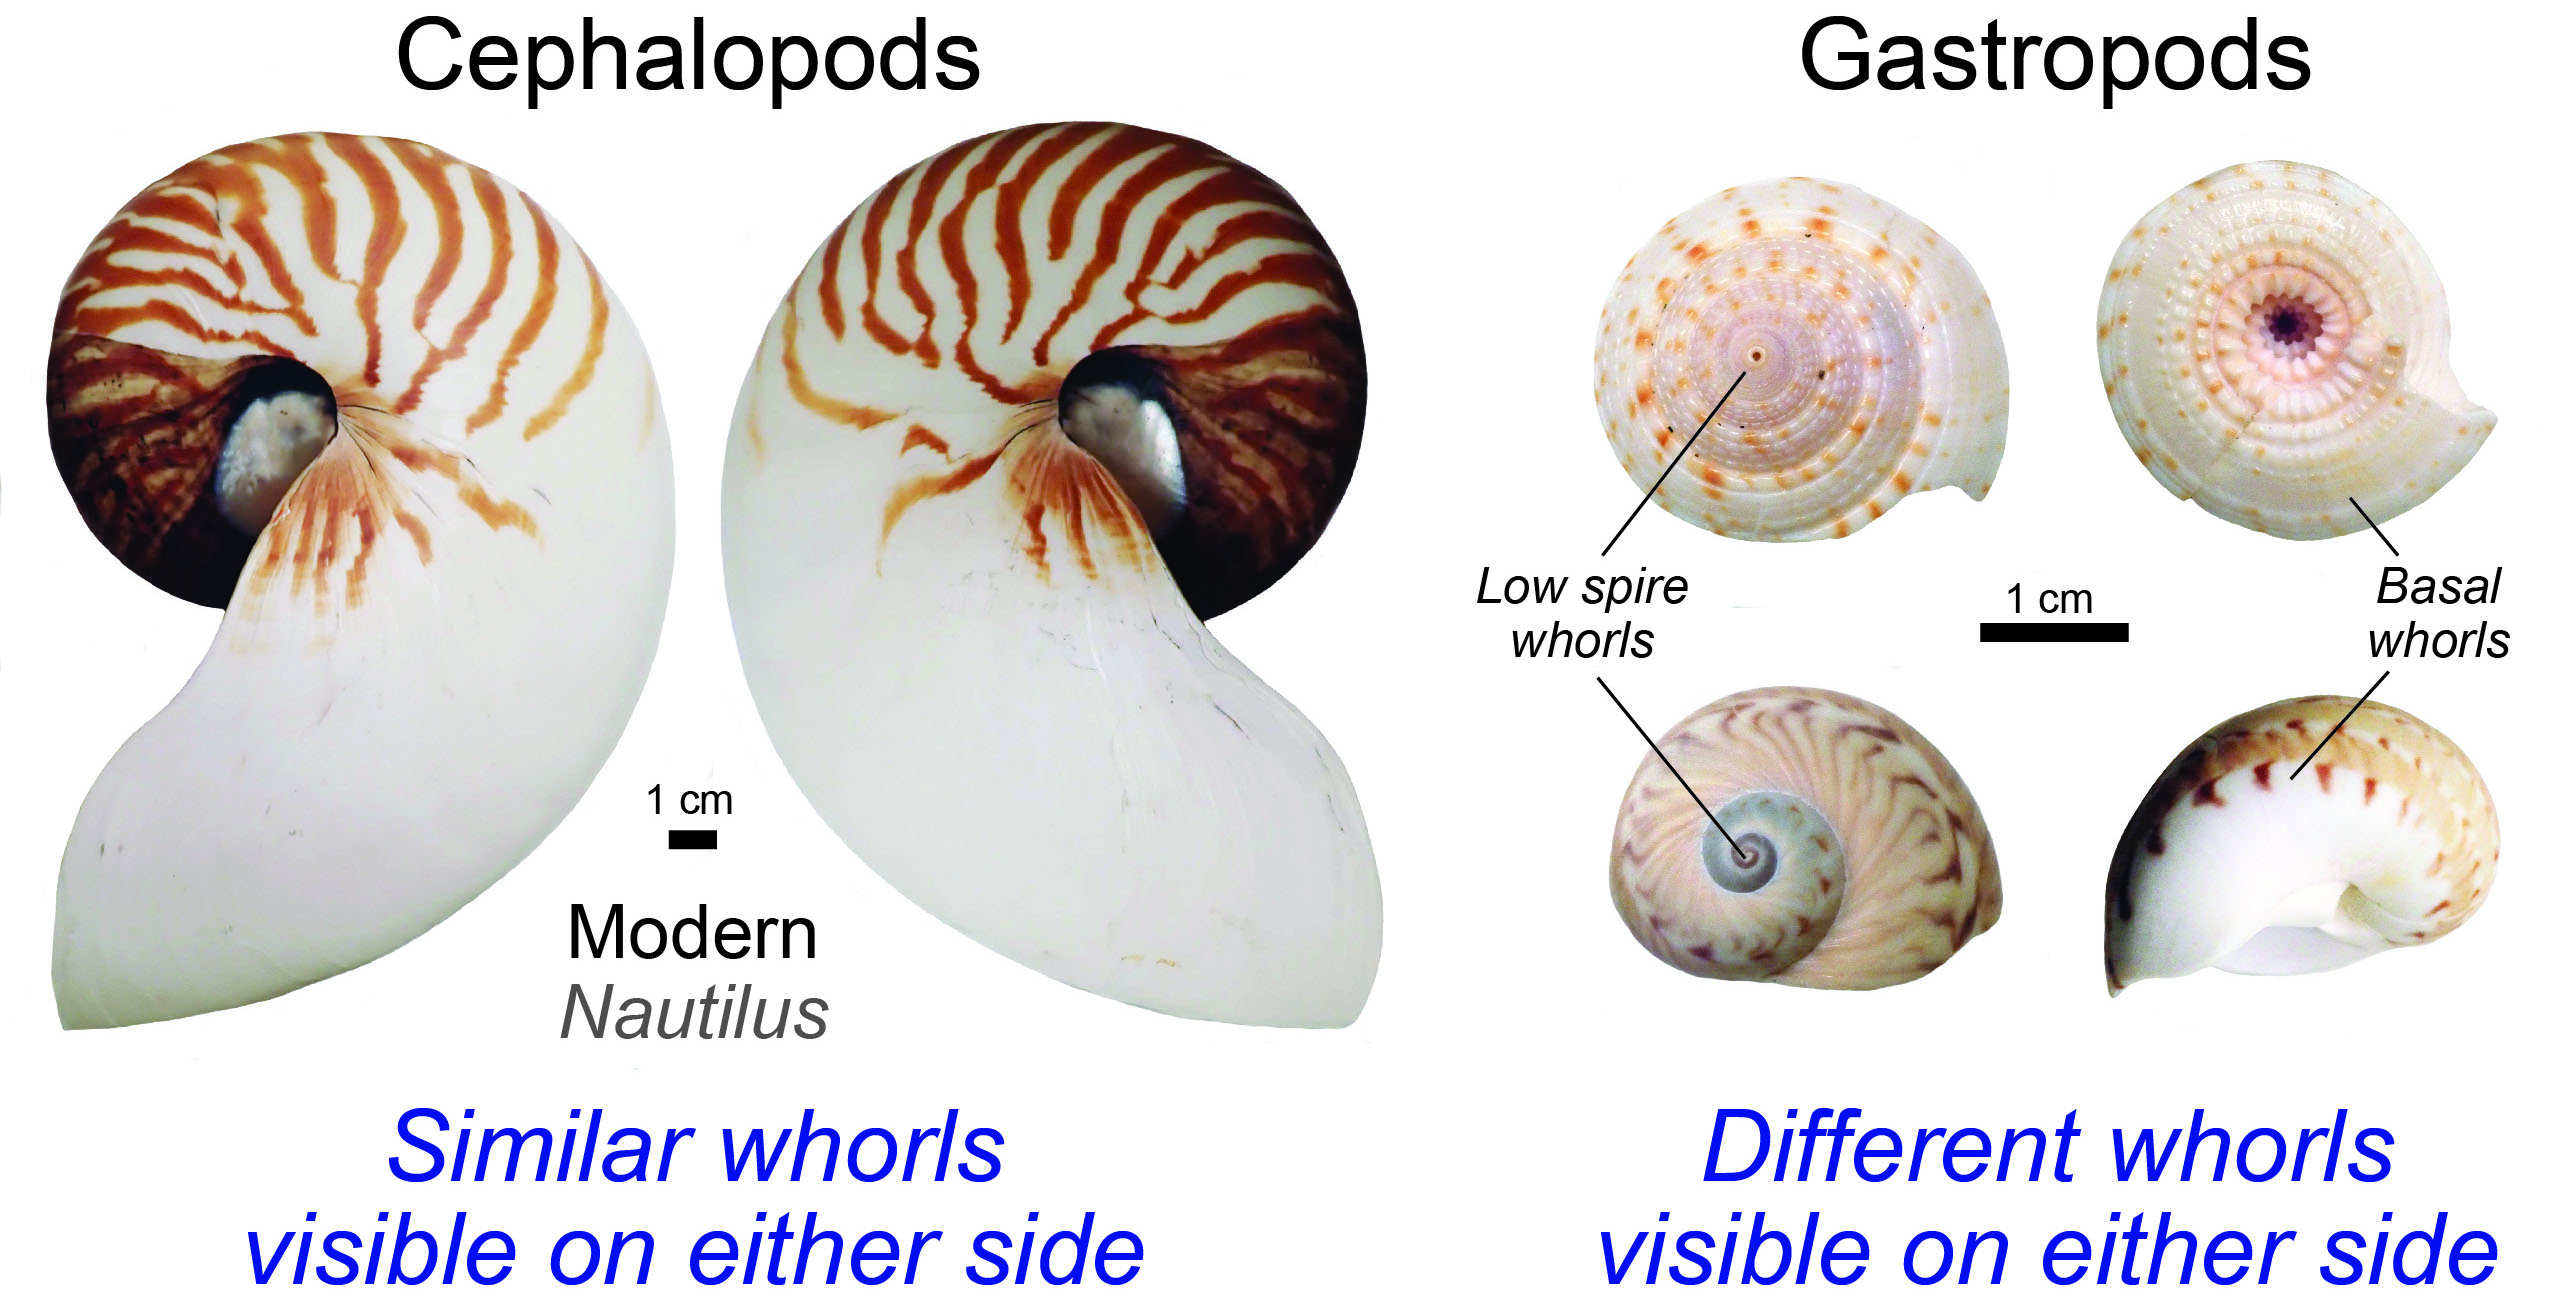 Whorls (coils) of nautiloid cephalopods are the same when viewed from either side of the aperture, while the number and appearance of whorls of gastropods are different on either side.